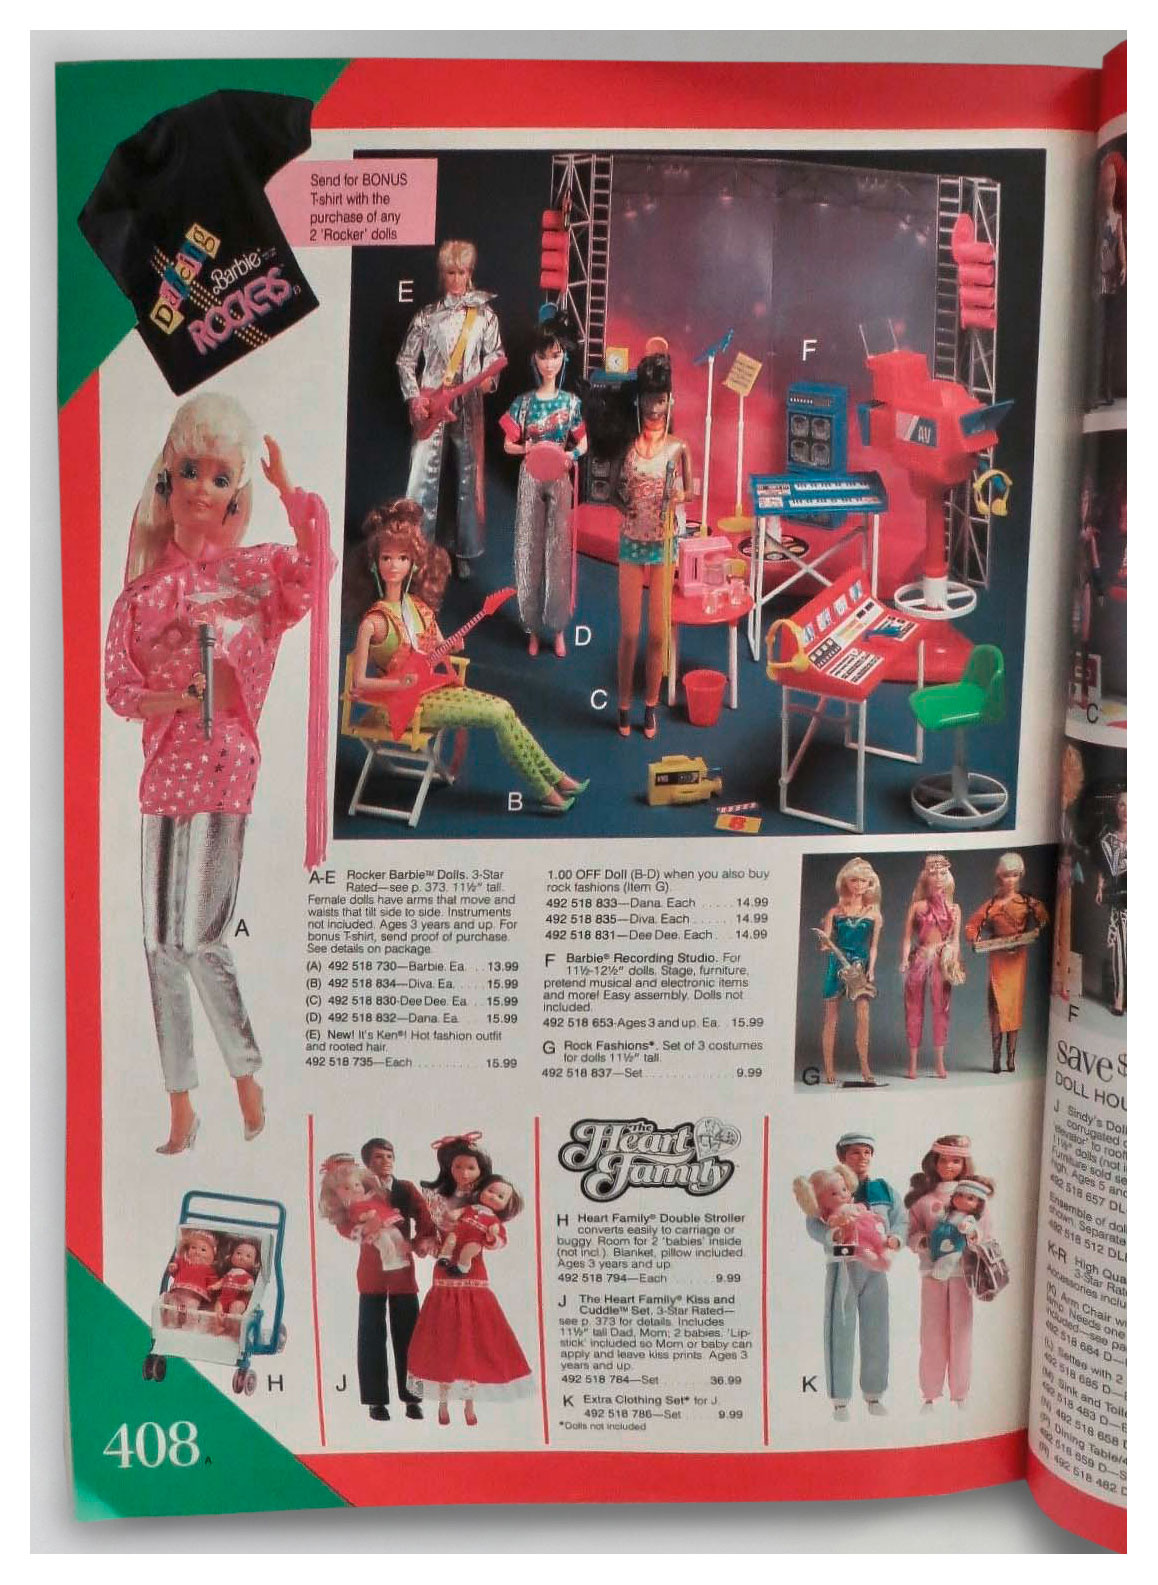 From 1987 Canadian Sears Wish Book